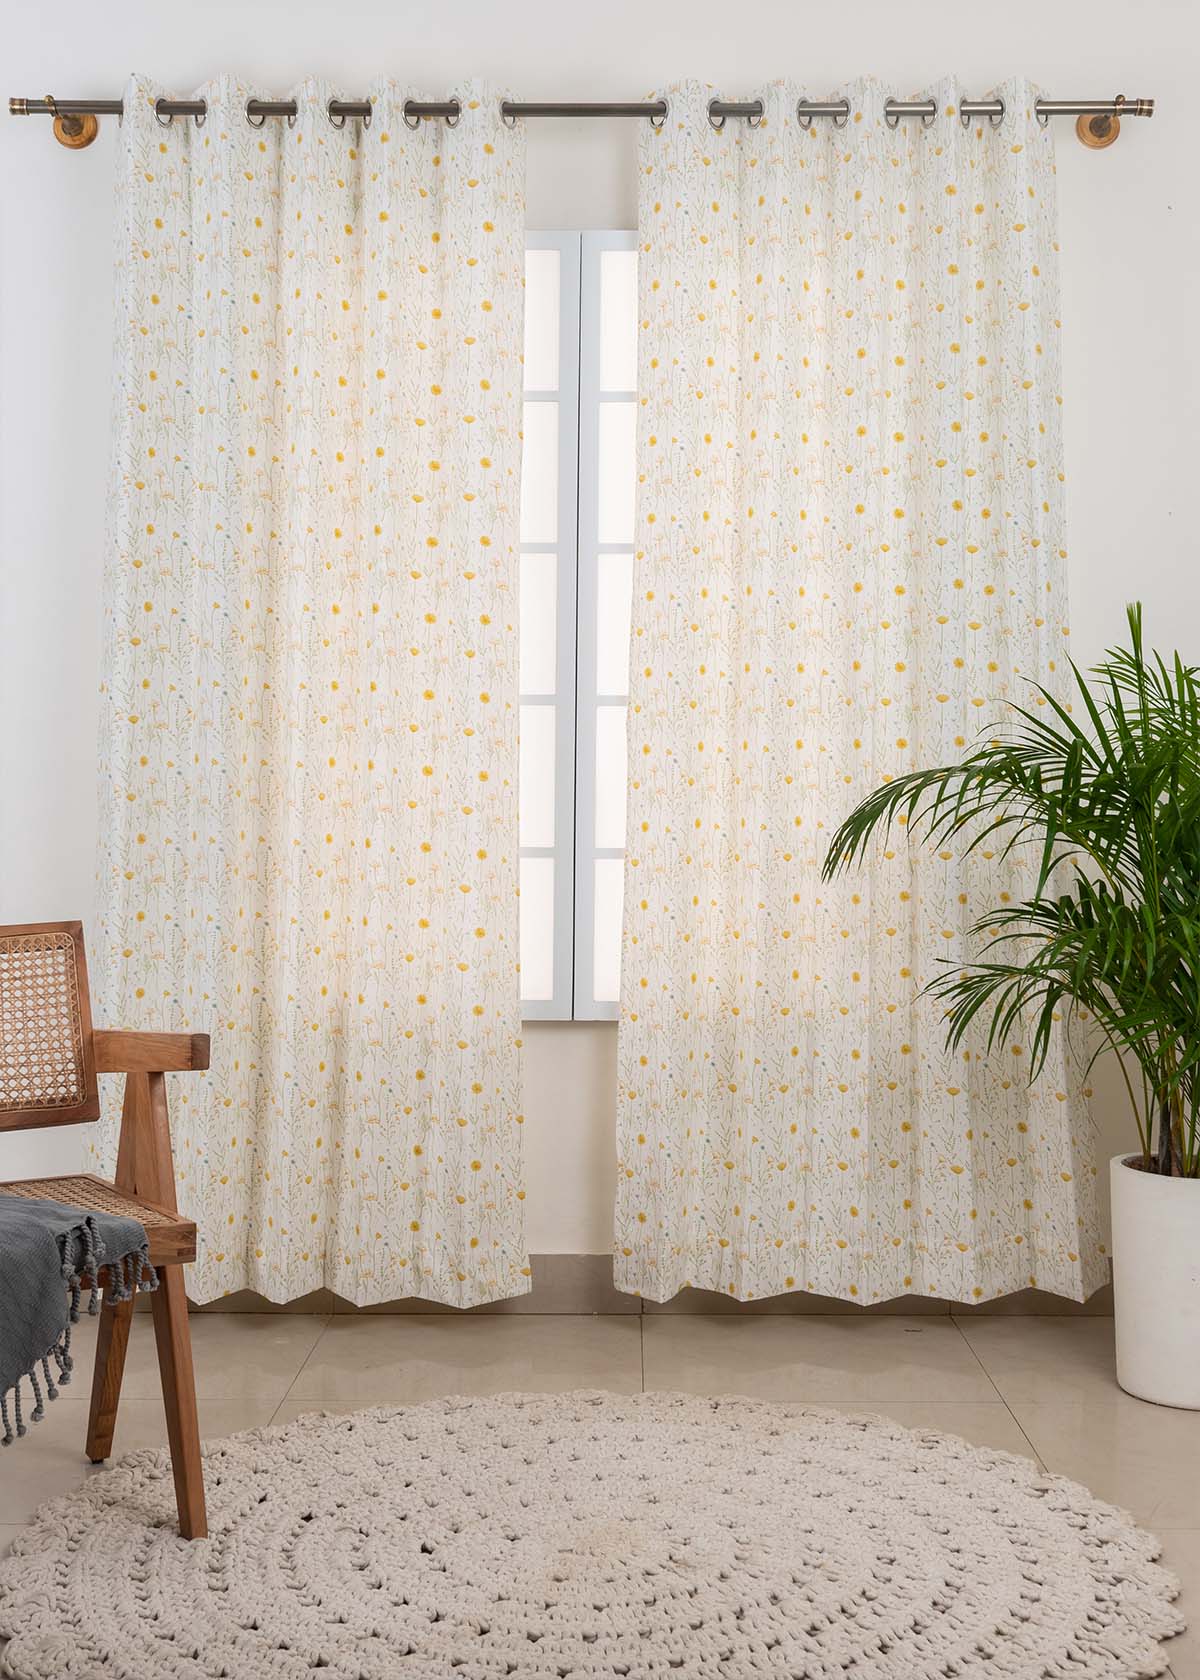 Drifting Dandelion 100% cotton floral curtain for kids room, living room - Room darkening - Yellow - Pack of 1